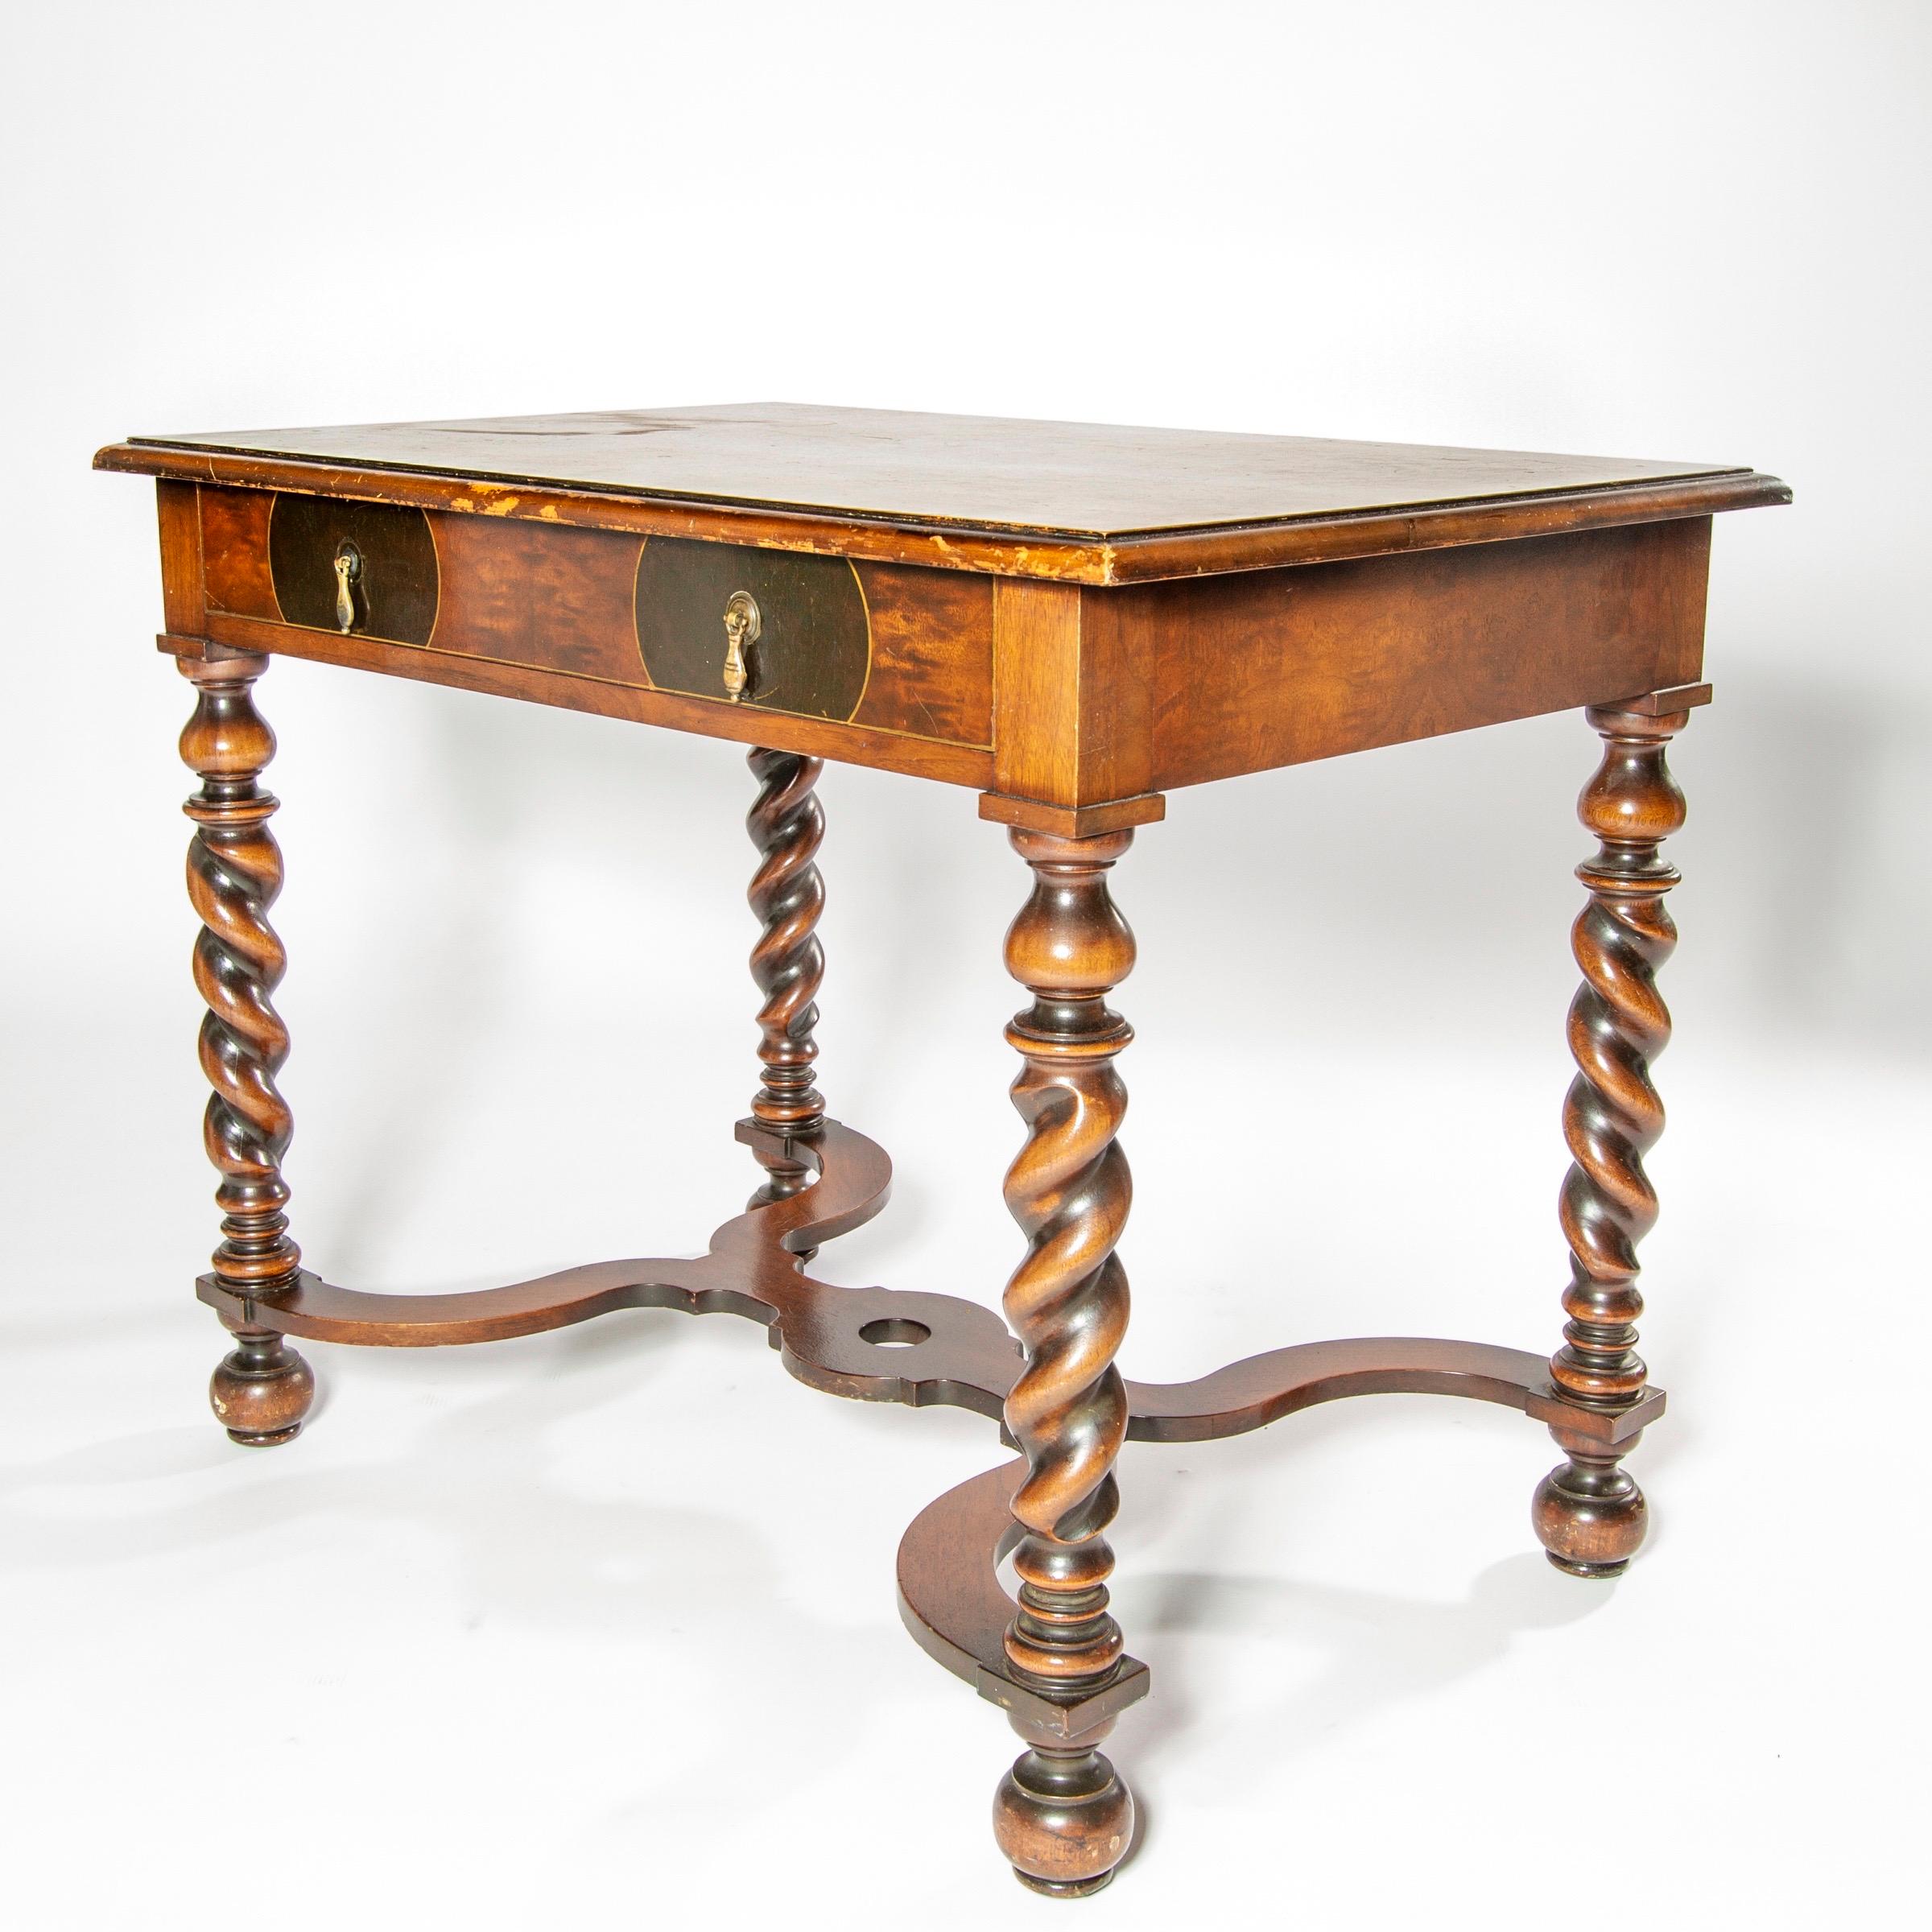 Exquisite Barley Twist side or end table rendered in walnut with an inlay marquetry top by Sligh Furniture, USA

Contact dealer for estimate to refinish top